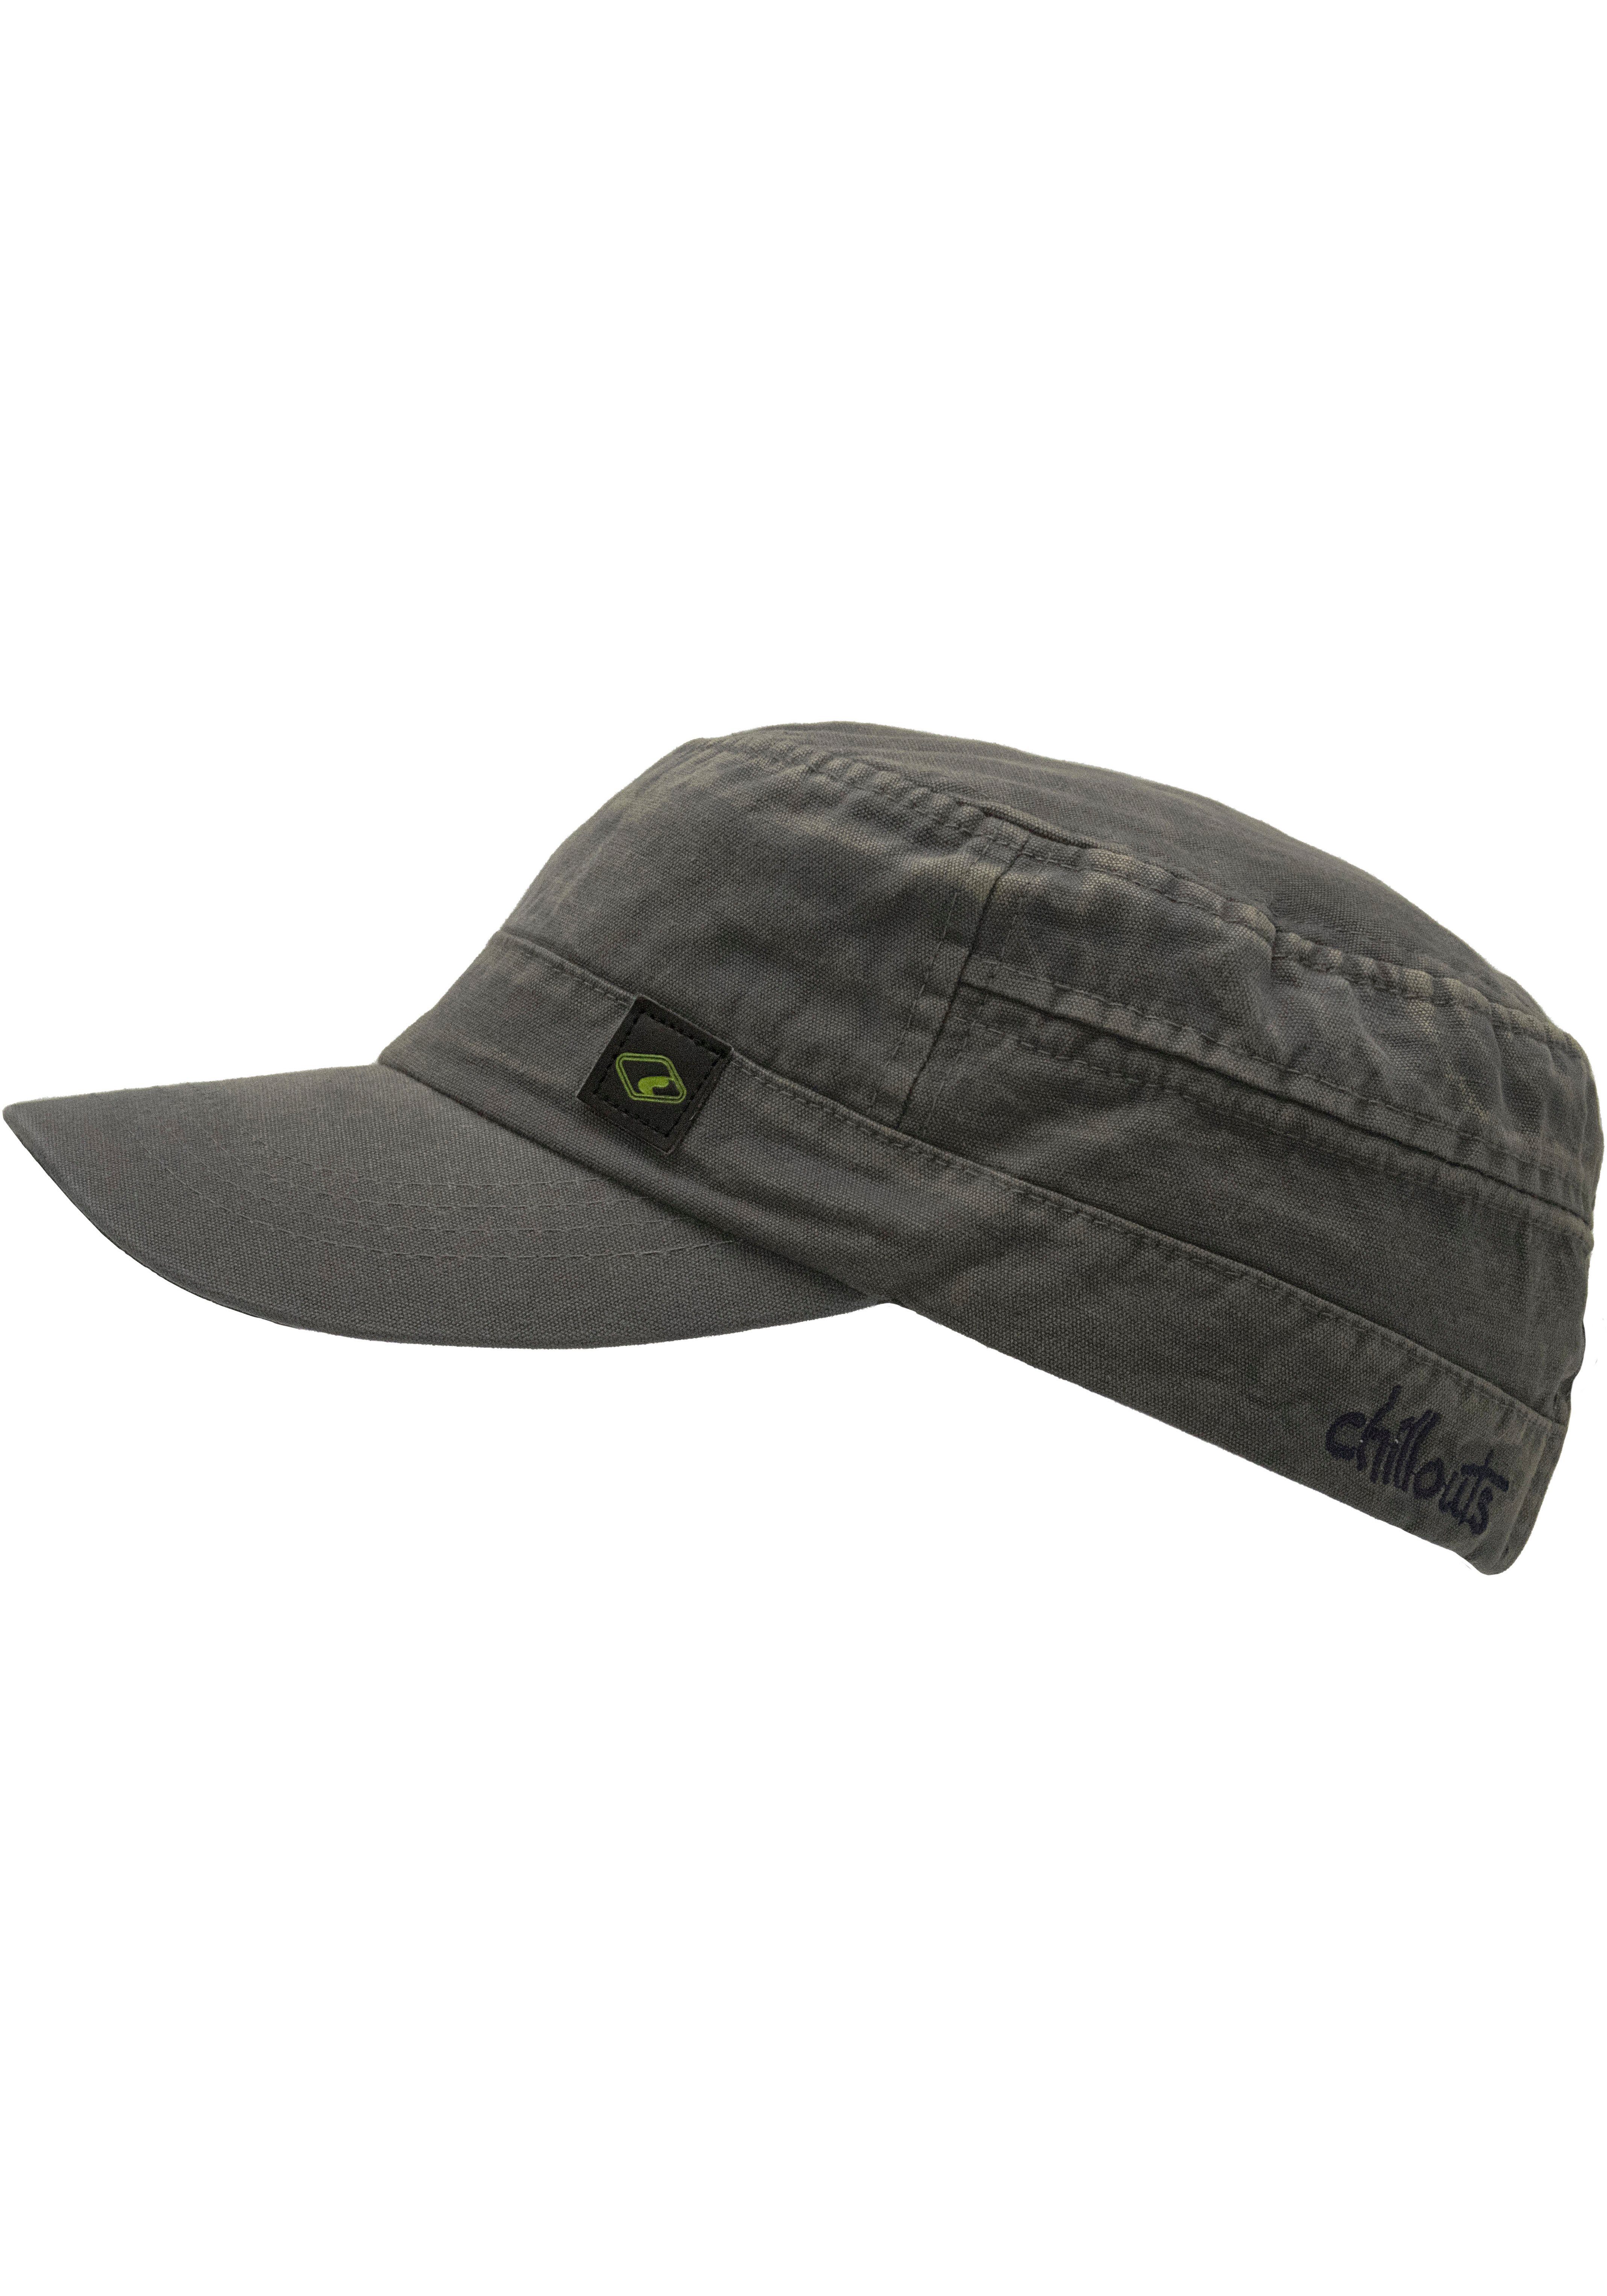 chillouts Army Cap El Paso Hat aus reiner Baumwolle, atmungsaktiv, One Size washed grey | Army Caps